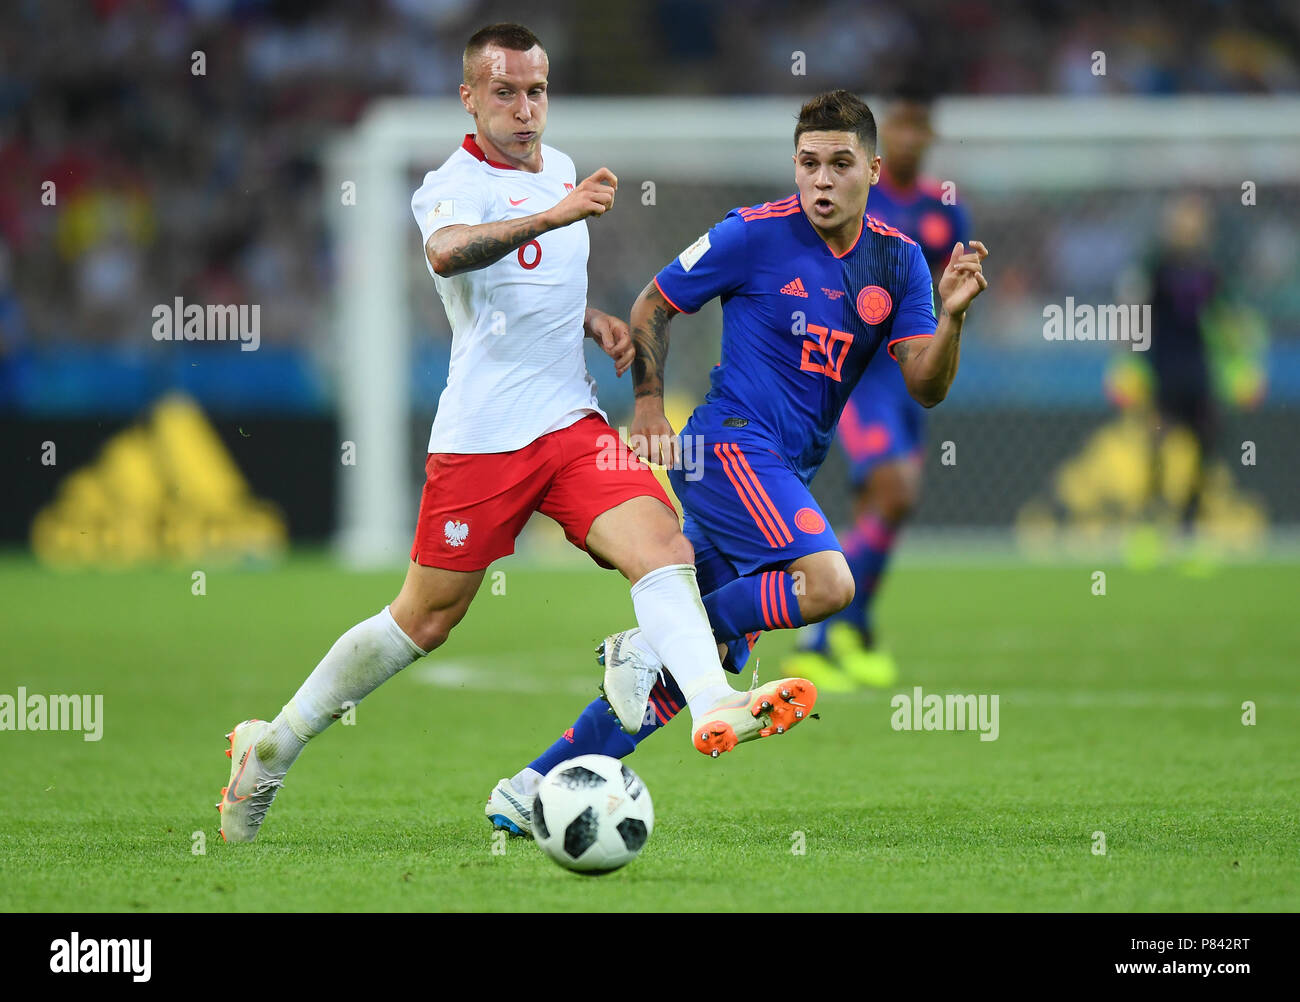 KAZAN, RUSSIA - JUNE 24: Juan Quintero of Colombia competes with Jacek Goralski of Poland during the 2018 FIFA World Cup Russia group H match between Poland and Colombia at Kazan Arena on June 24, 2018 in Kazan, Russia. (Photo by Lukasz Laskowski/PressFocus/MB Media) Stock Photo